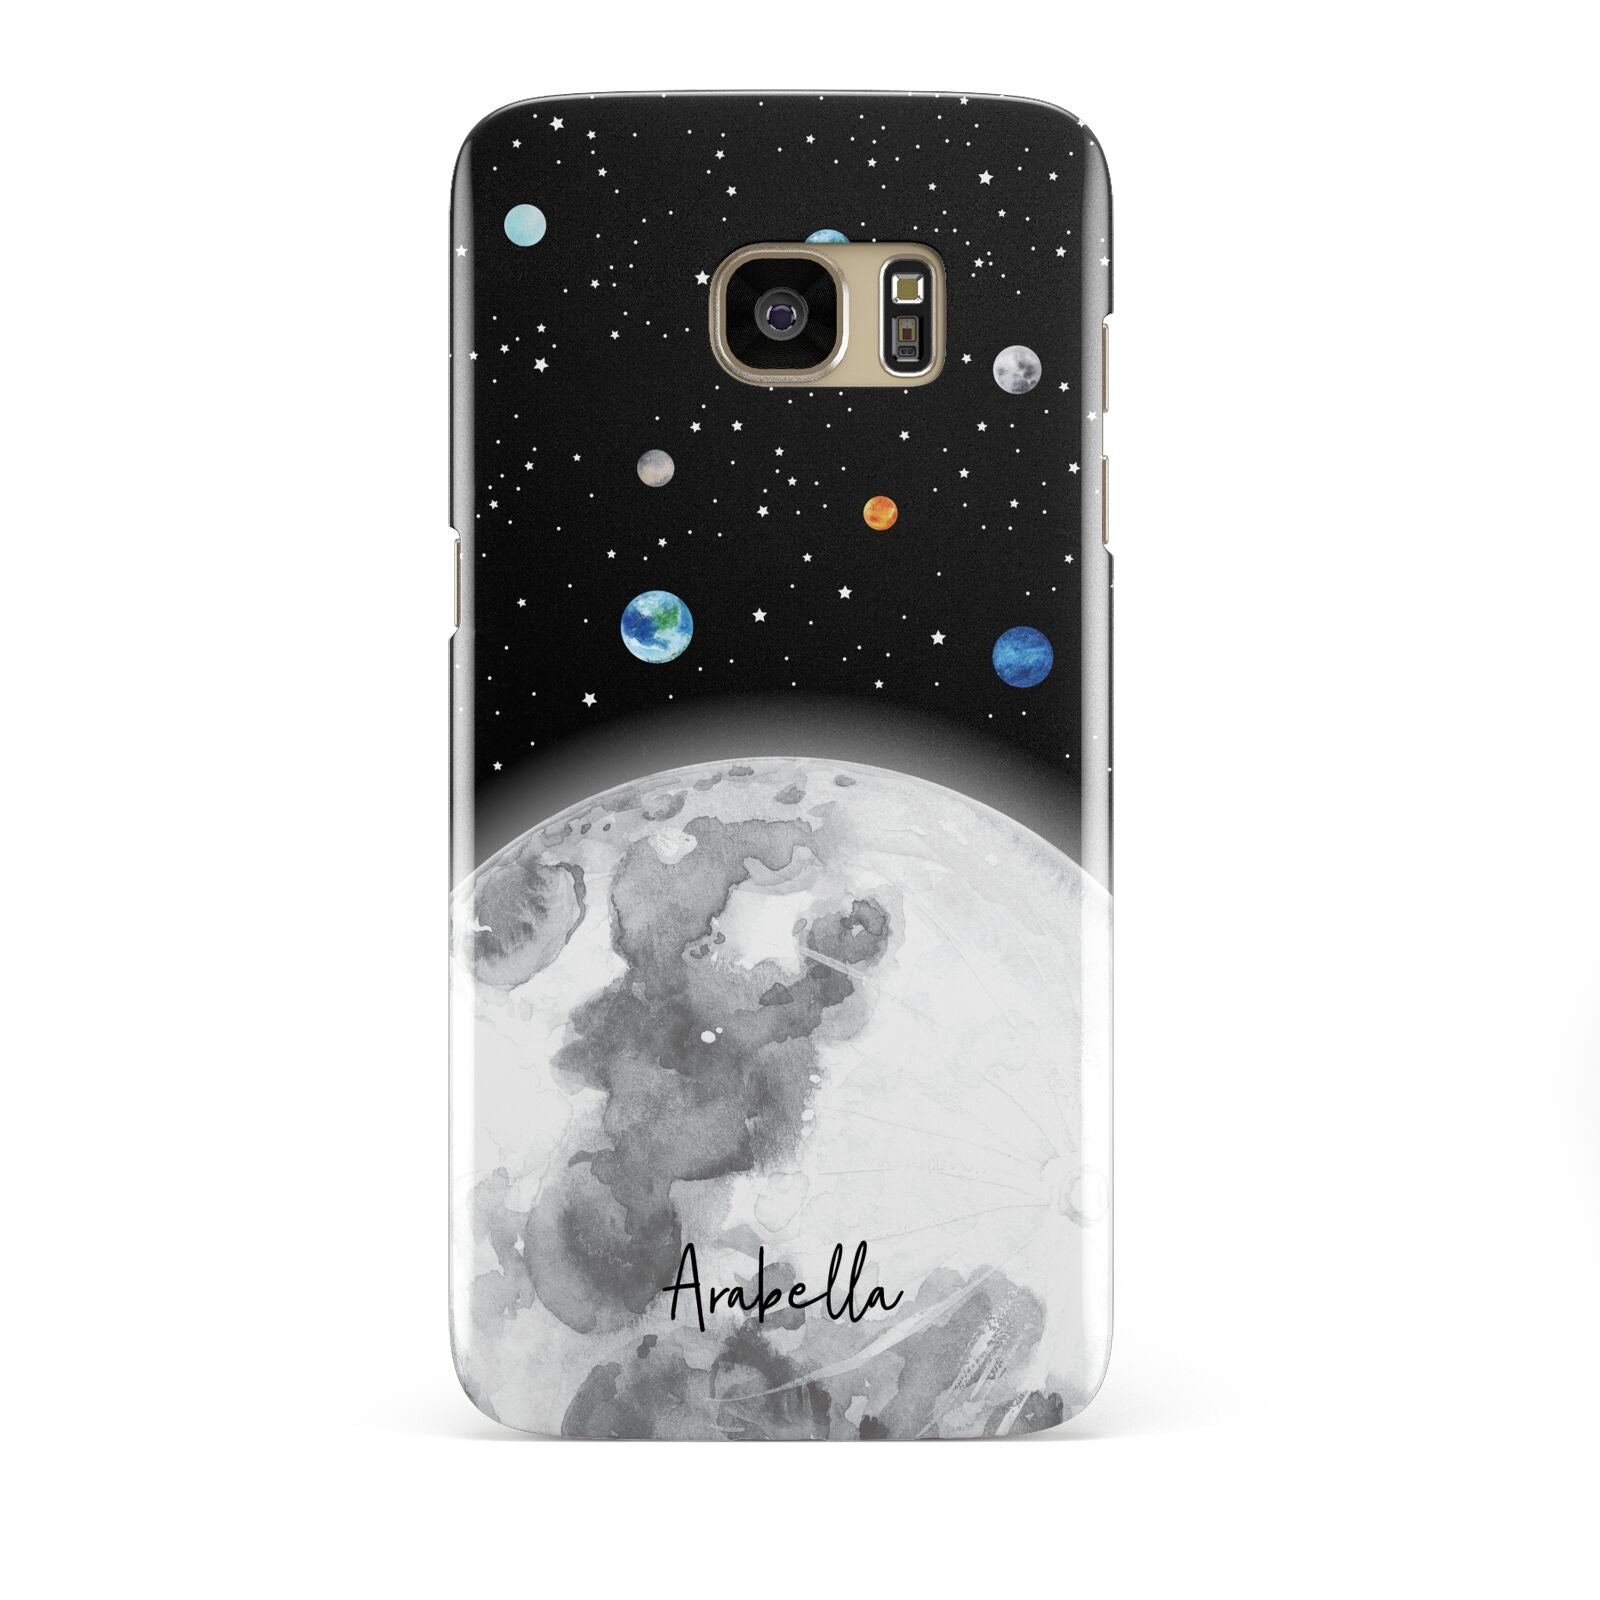 Watercolour Close up Moon with Name Samsung Galaxy S7 Edge Case